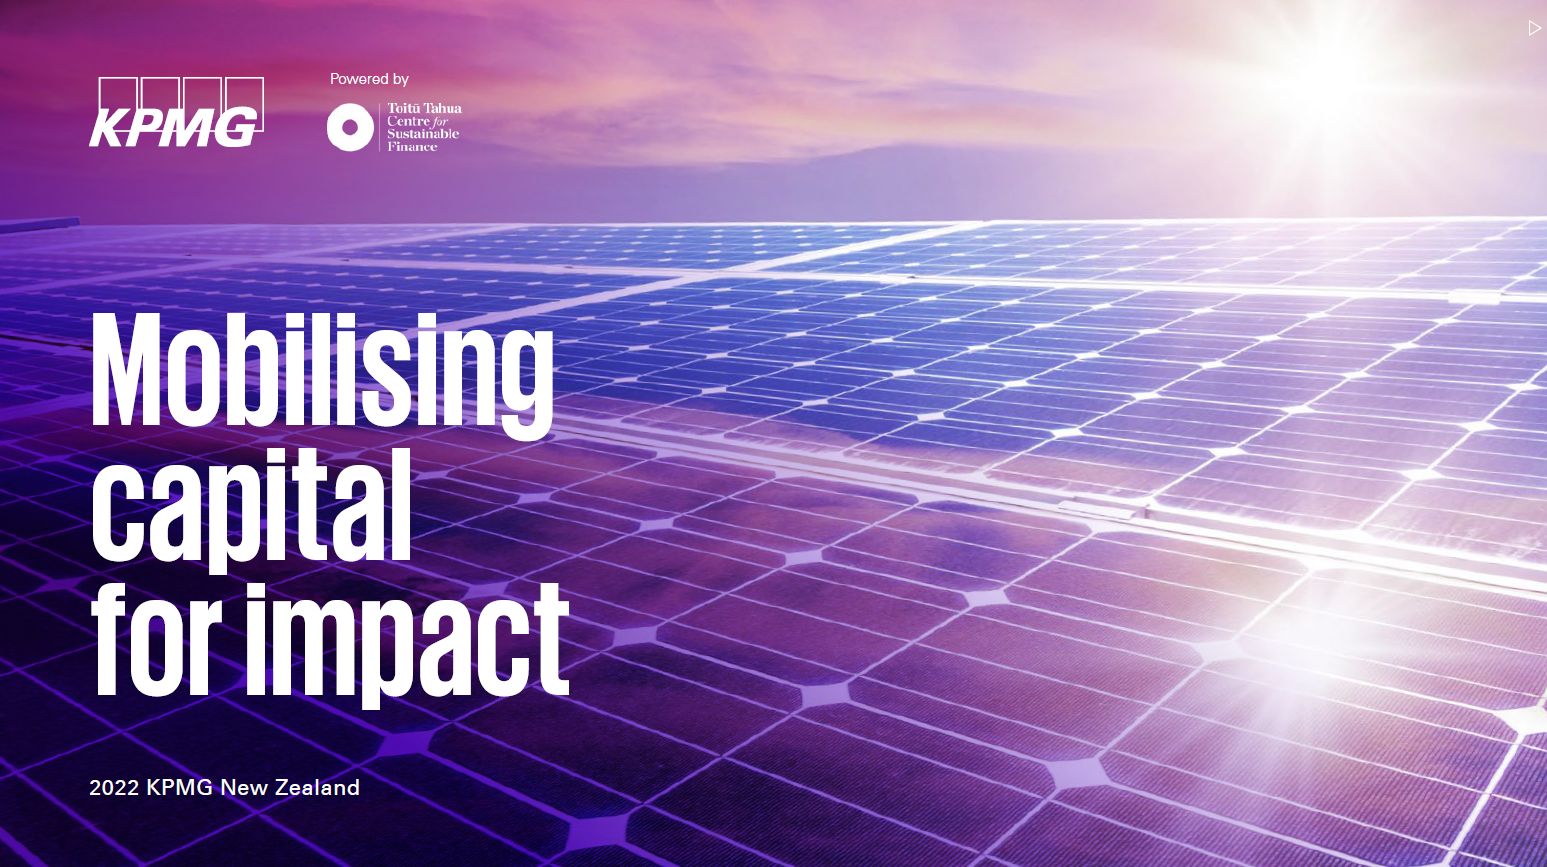 Mobilising capital for impact